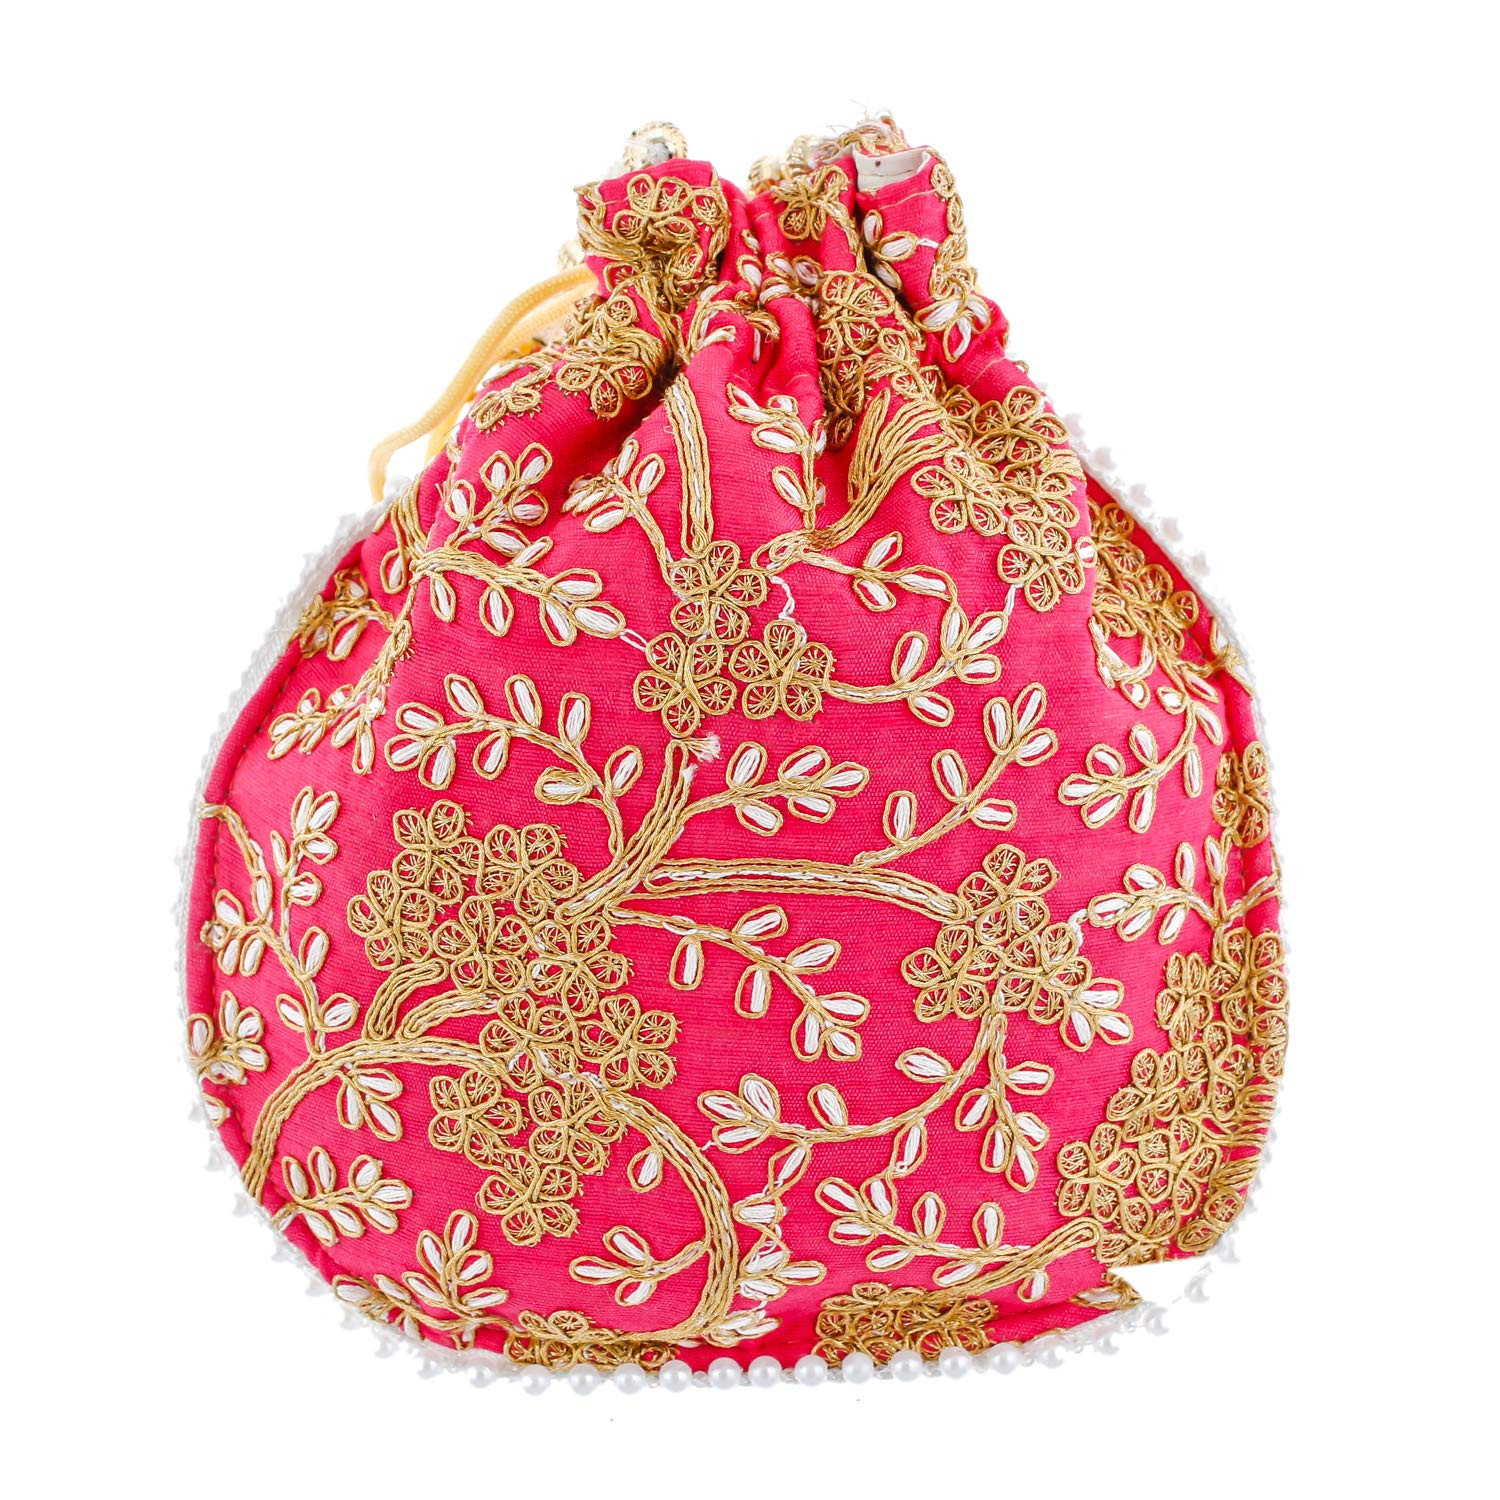 Kuber Industries Embroidery Drawstring Potli|Hand Purse With Gold Pearl Border & Handle For Woman,Girls (Pink)